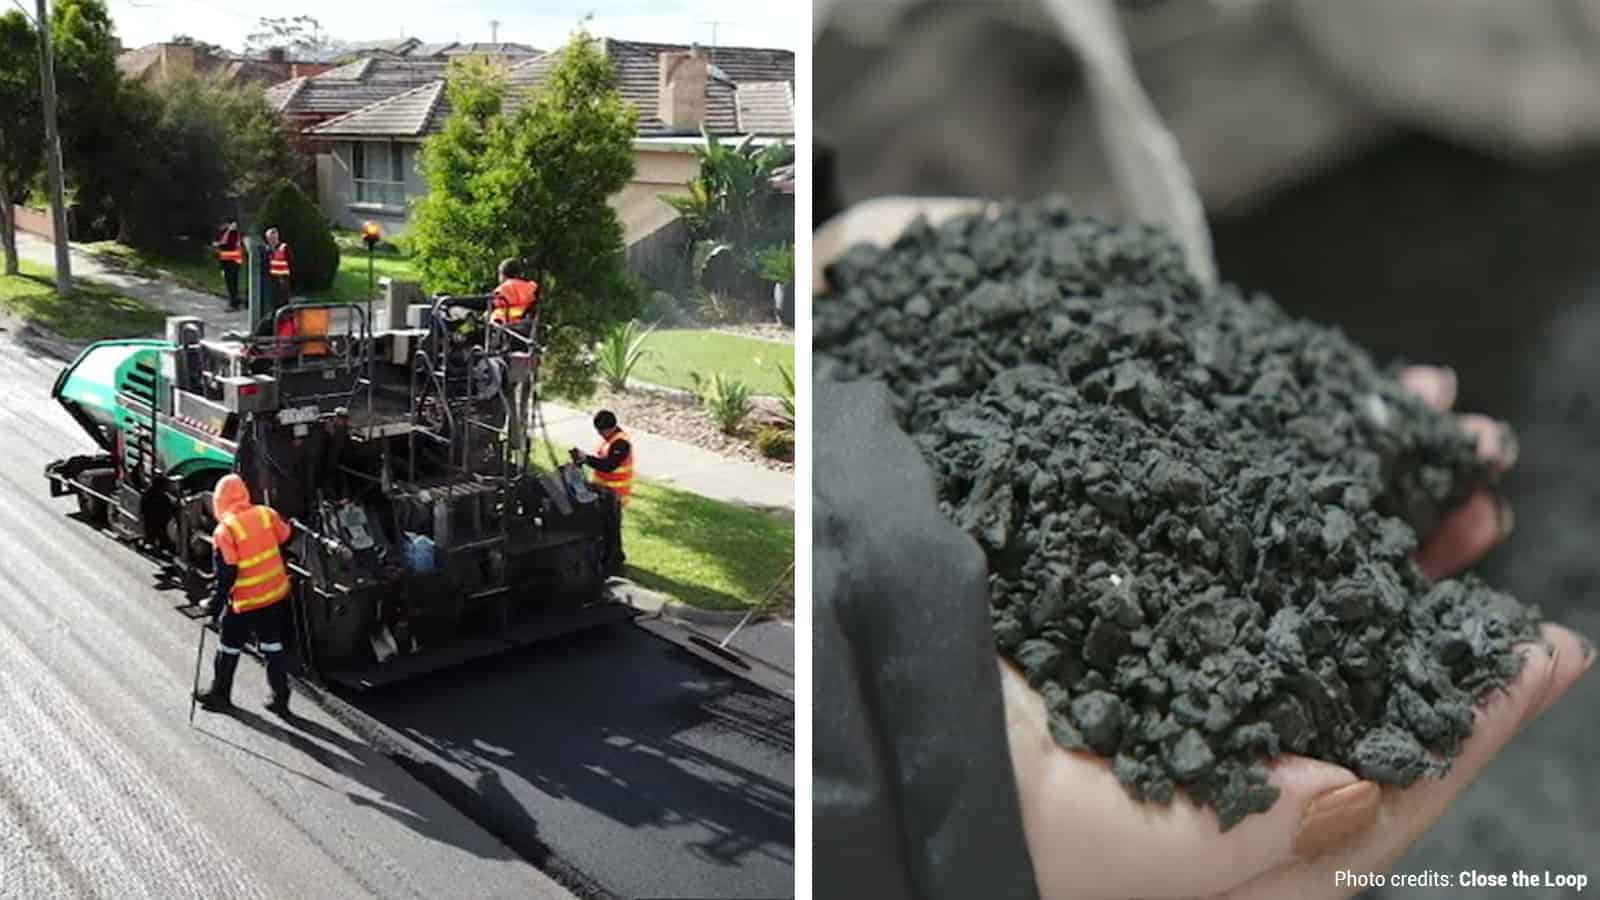 Australians Reveal How They Can Build Roadways Out of Recycled Waste